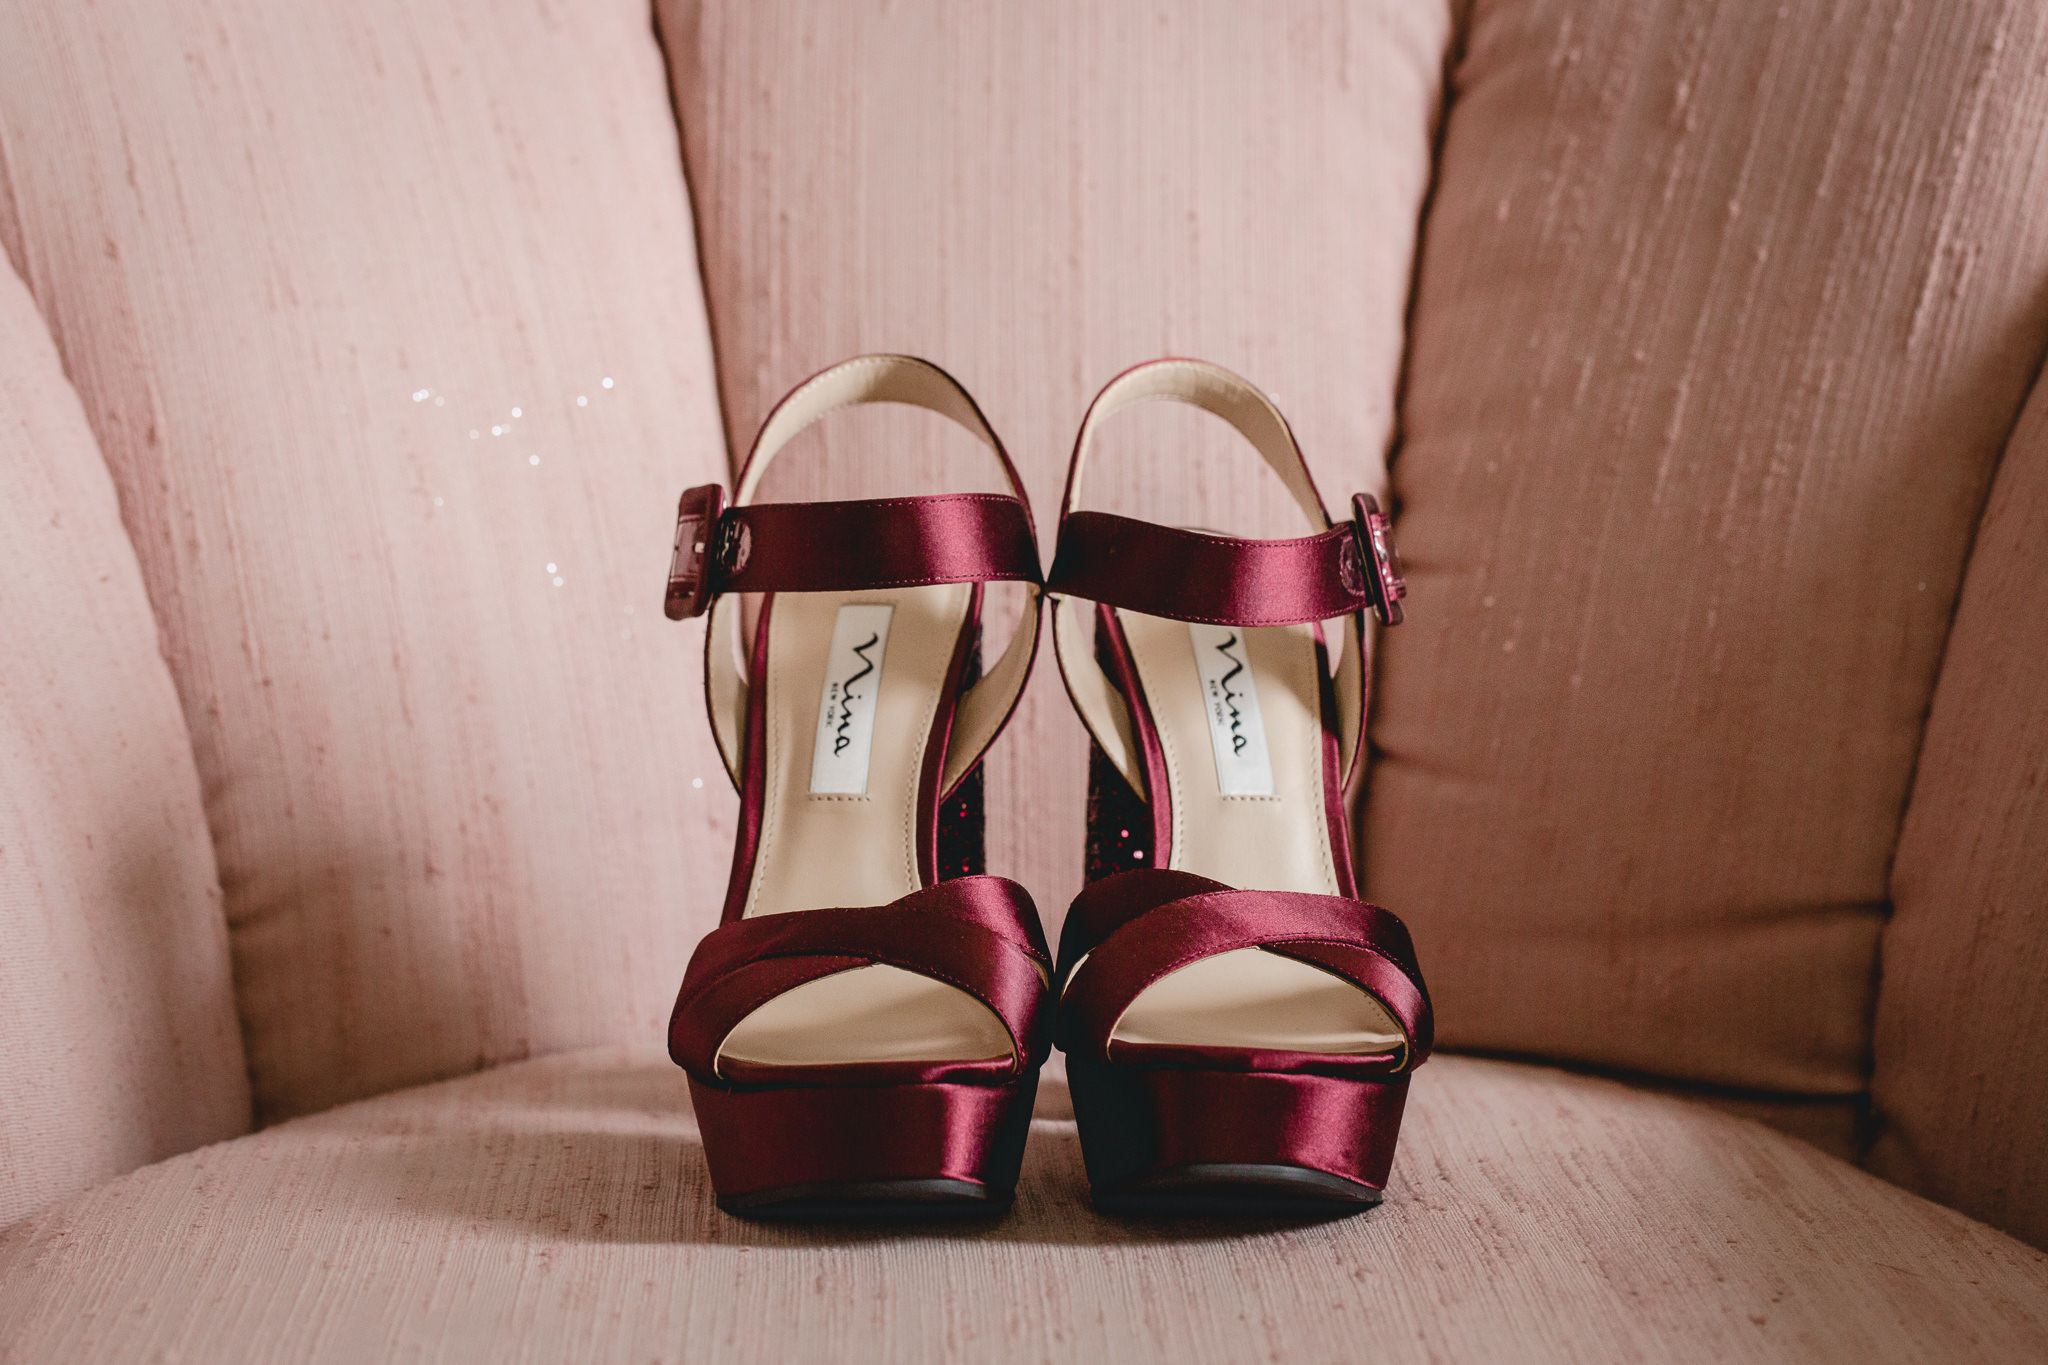 Burgundy wedding shoes for an October Pittsburgh wedding